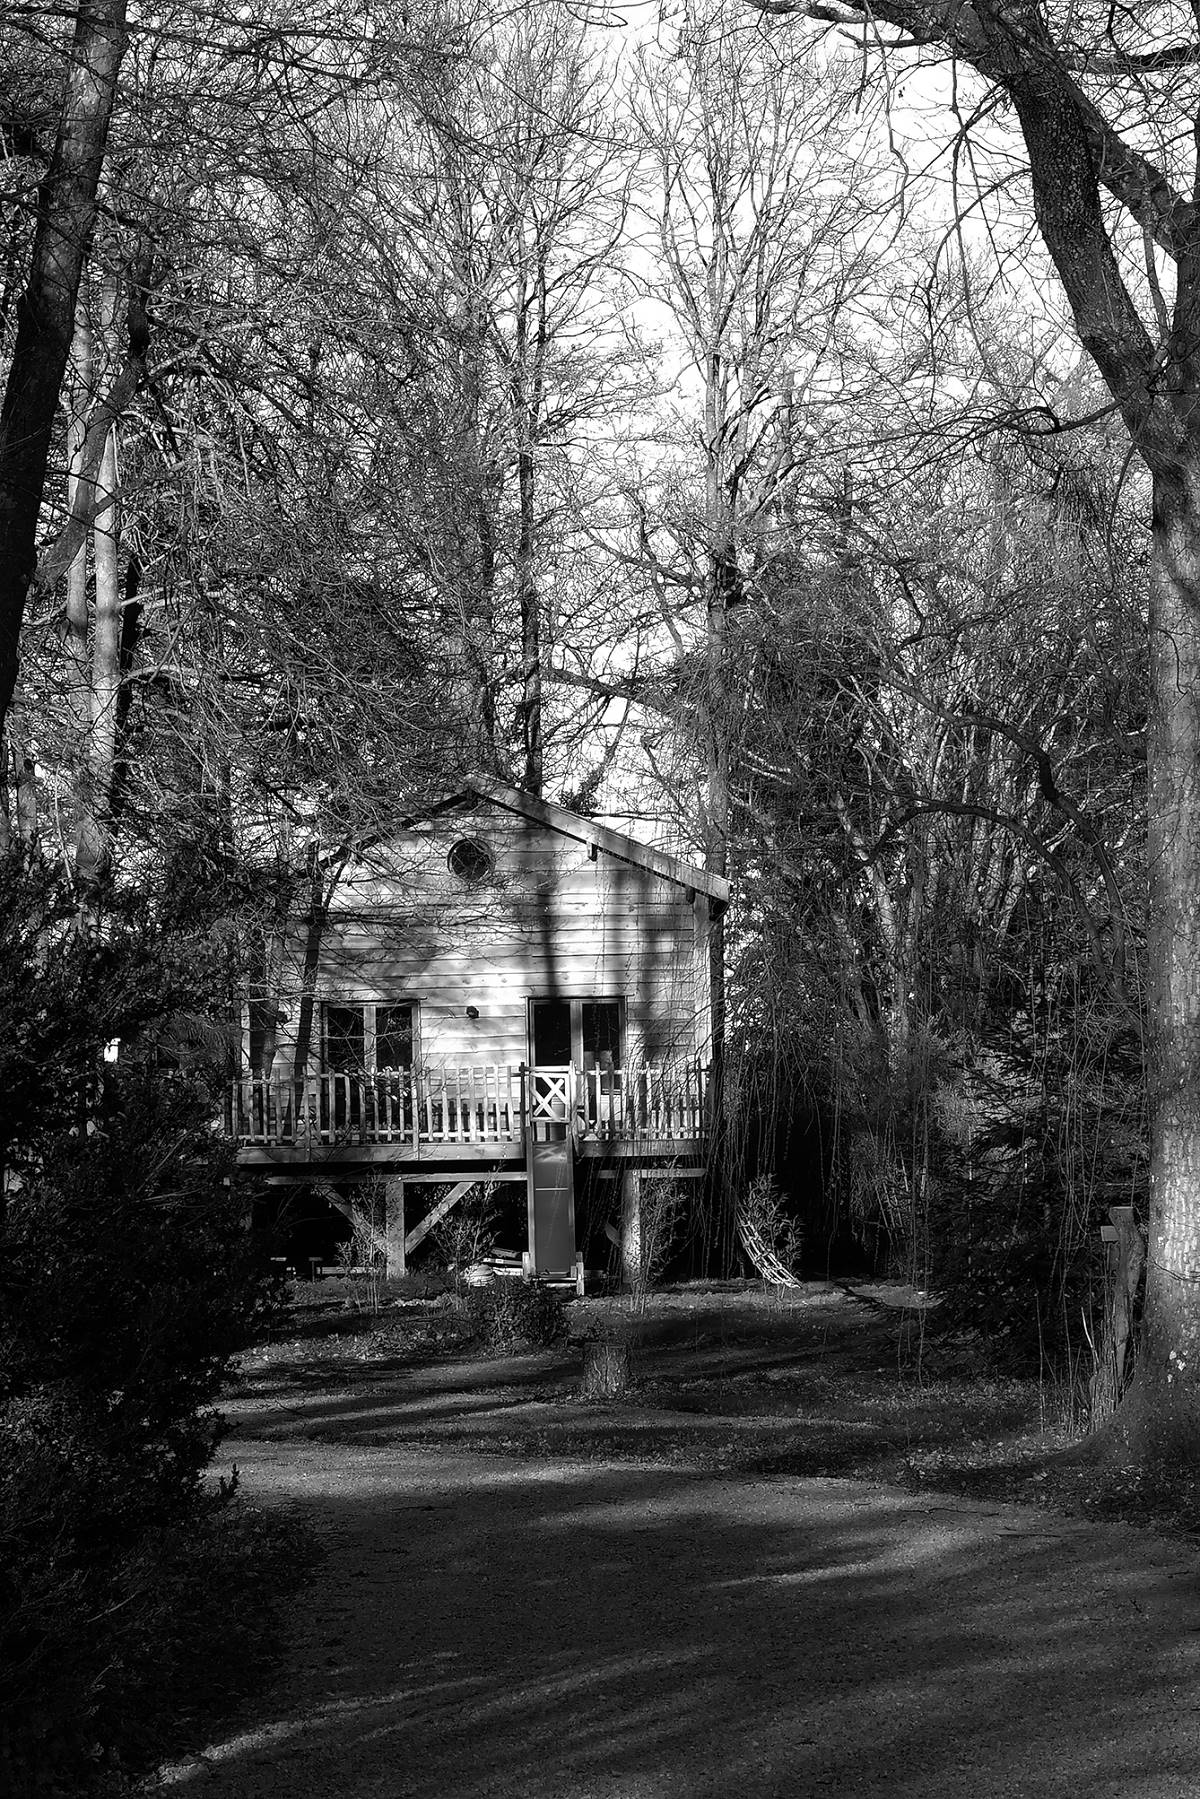 The Fun-nest cabin black and white alley